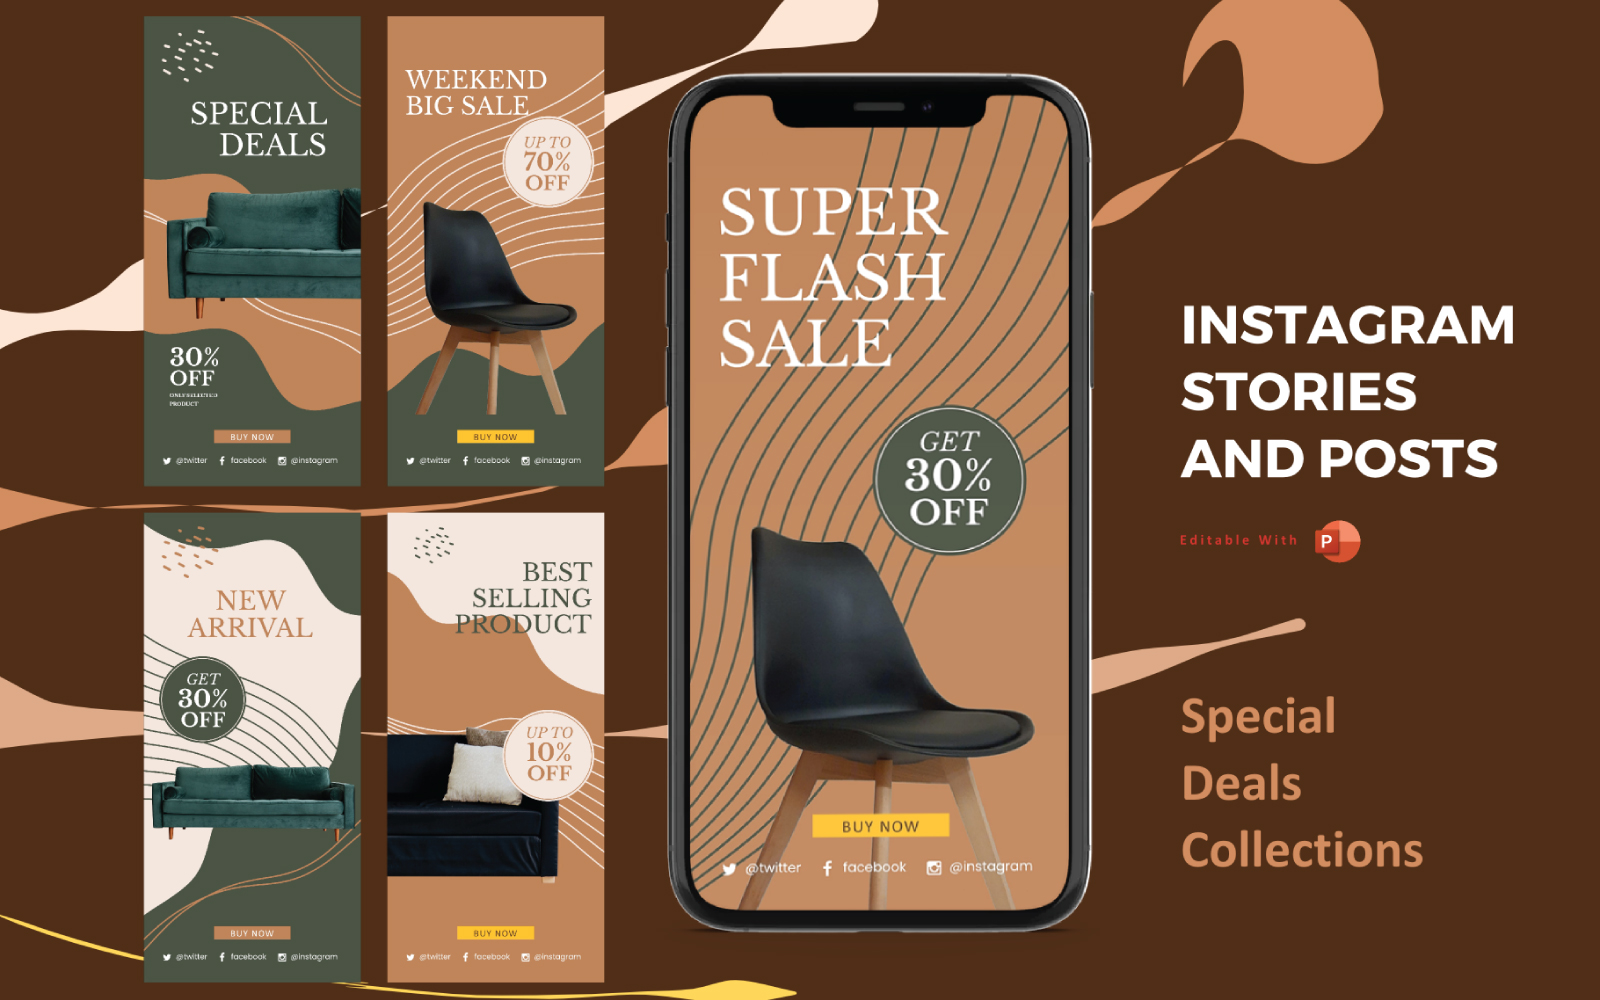 Instagram Stories and Posts Powerpoint Social Media Template - Special Deals Product